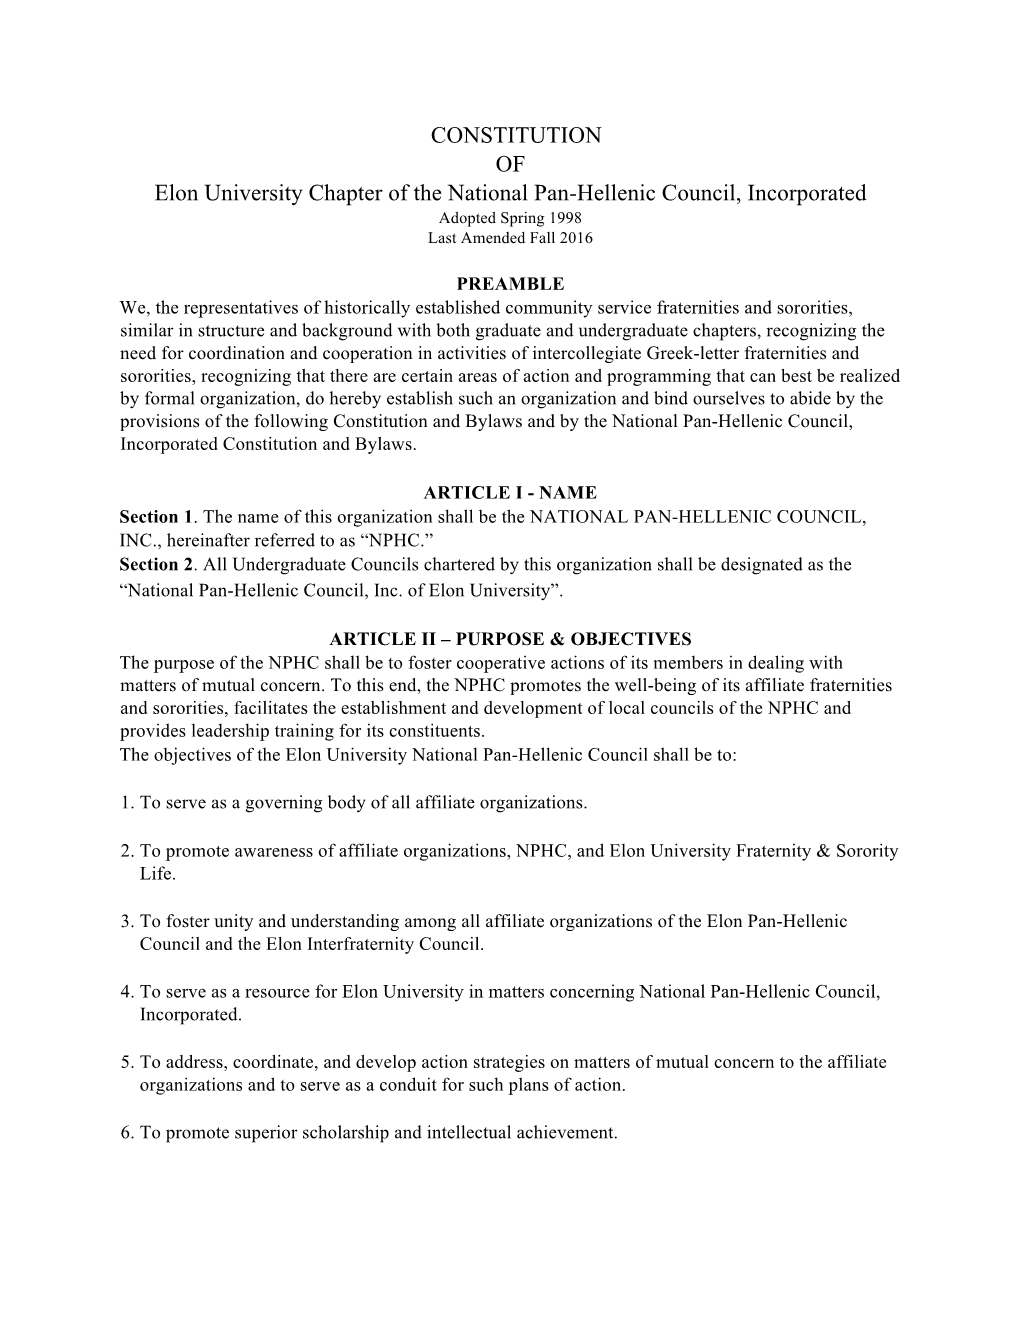 CONSTITUTION of Elon University Chapter of the National Pan-Hellenic Council, Incorporated Adopted Spring 1998 Last Amended Fall 2016